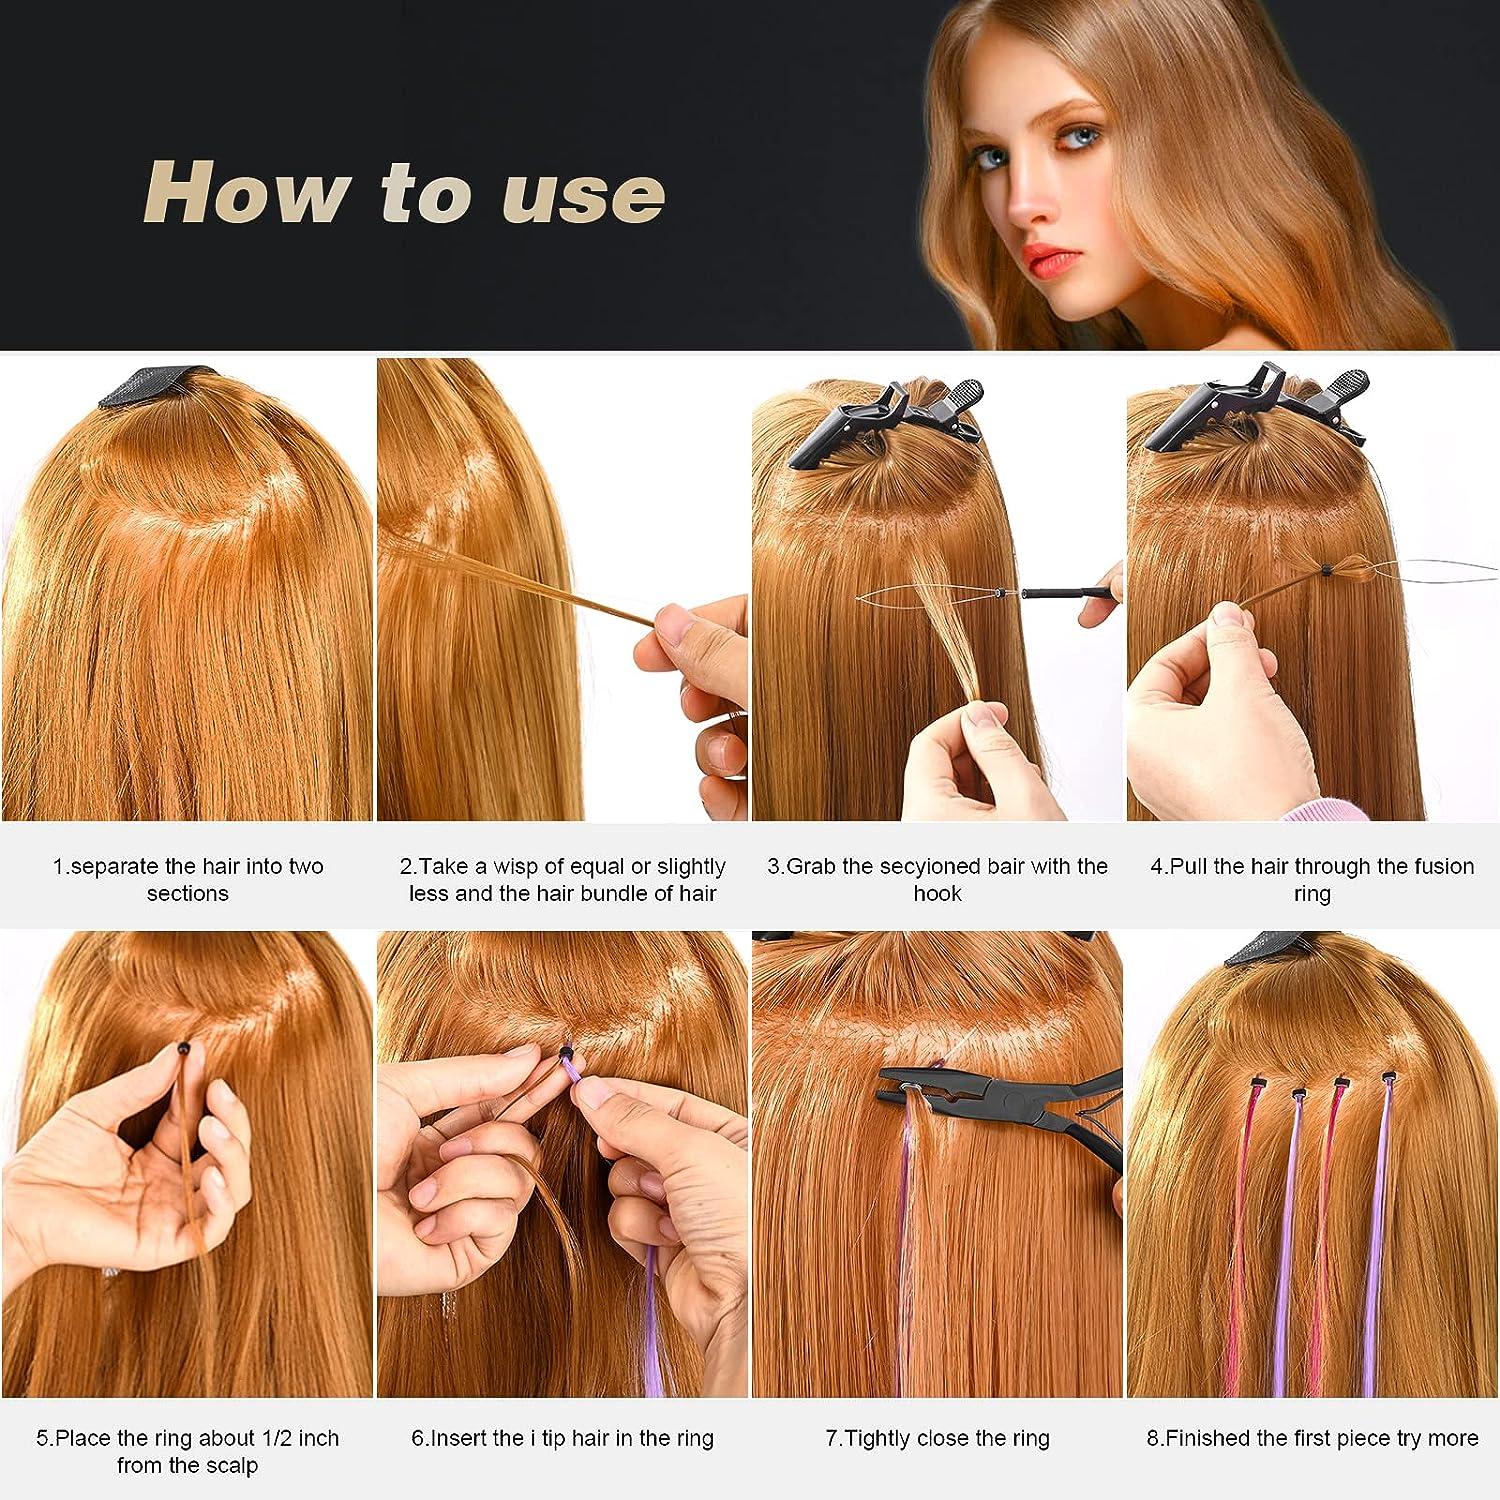 Pro Kit for Hot Fusion Hair Extensions